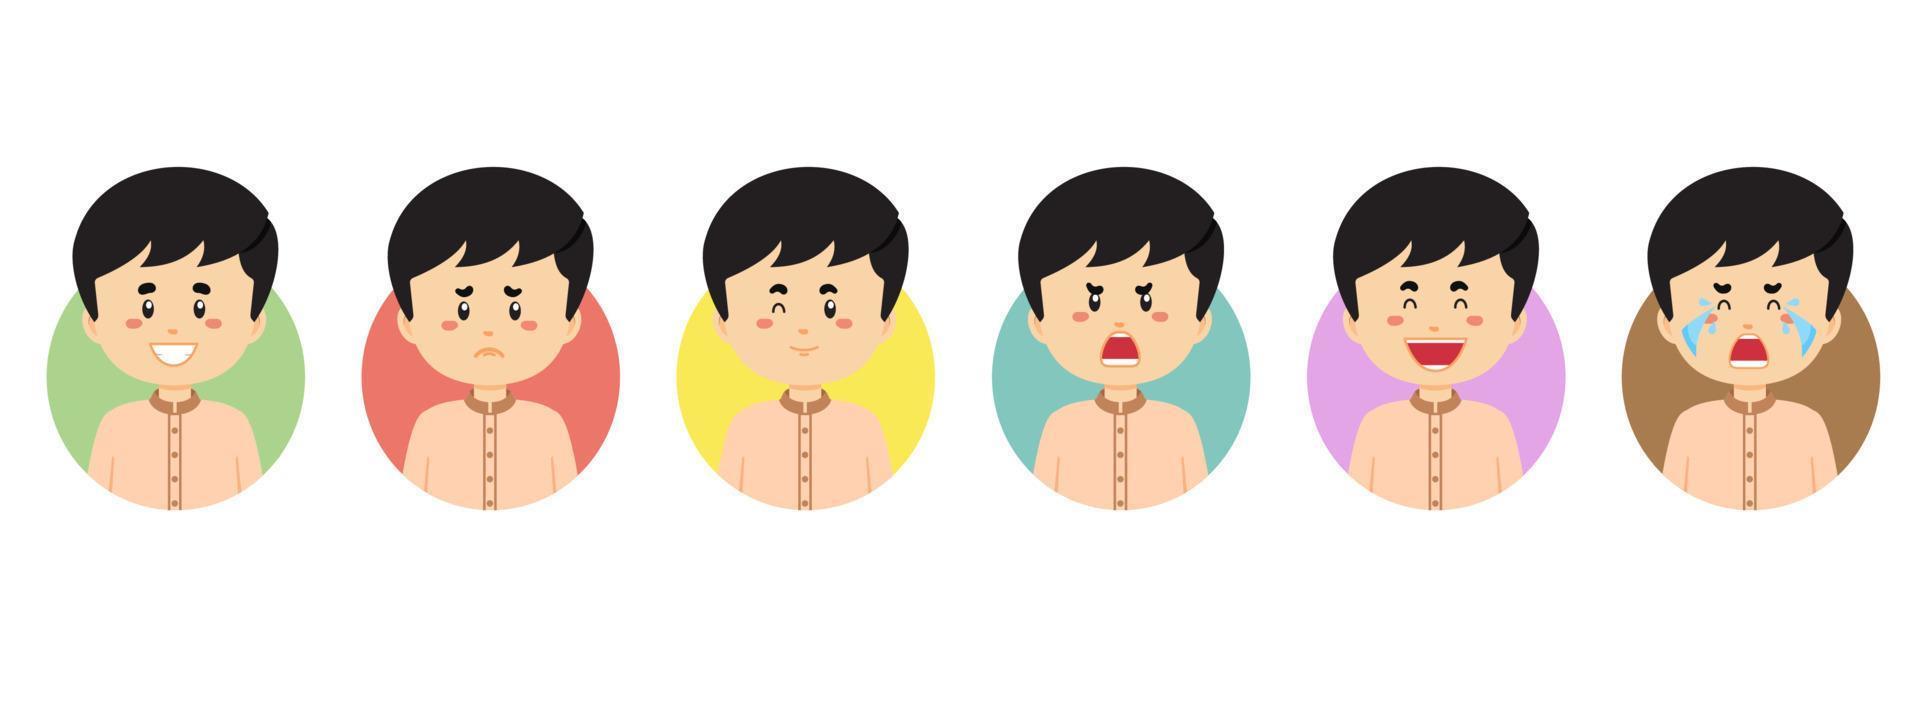 Thailand Avatar with Various Expression vector